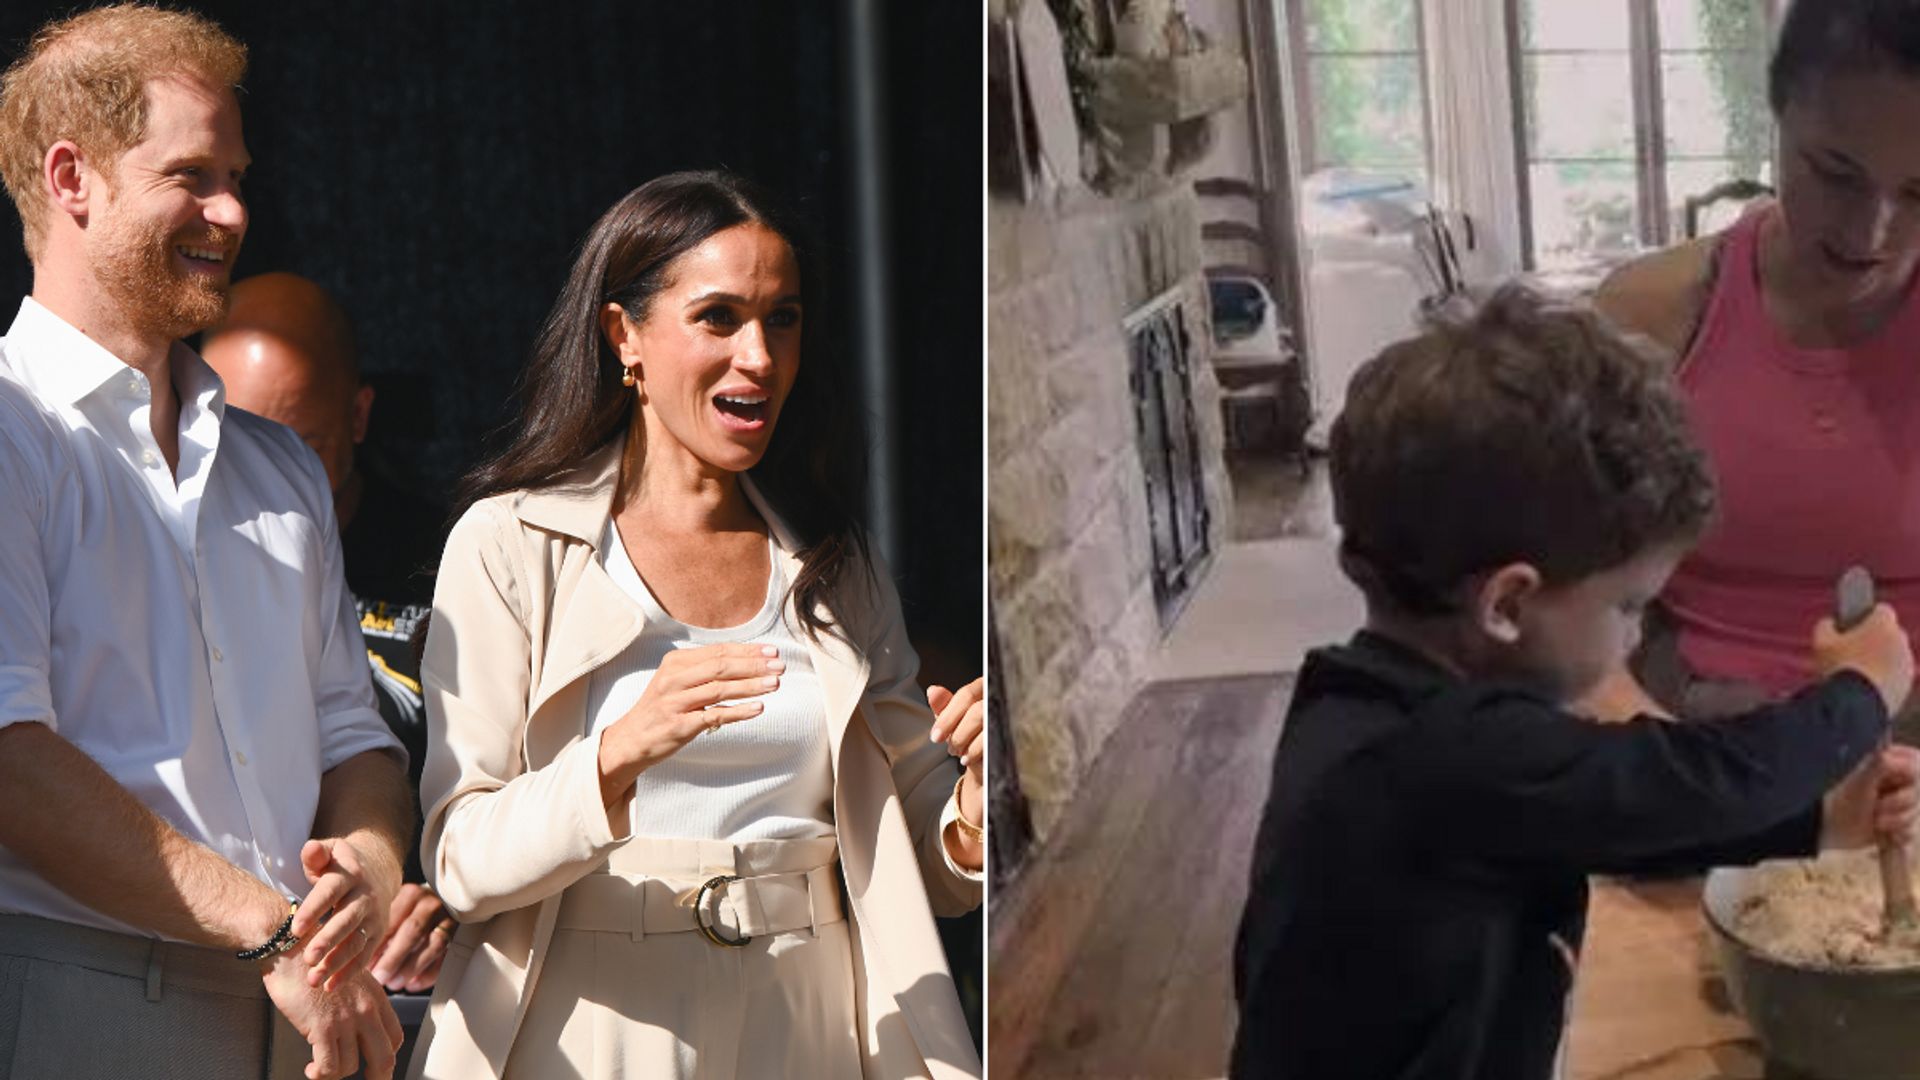 When Meghan Markle's Son Archie First Met Prince George, Princess